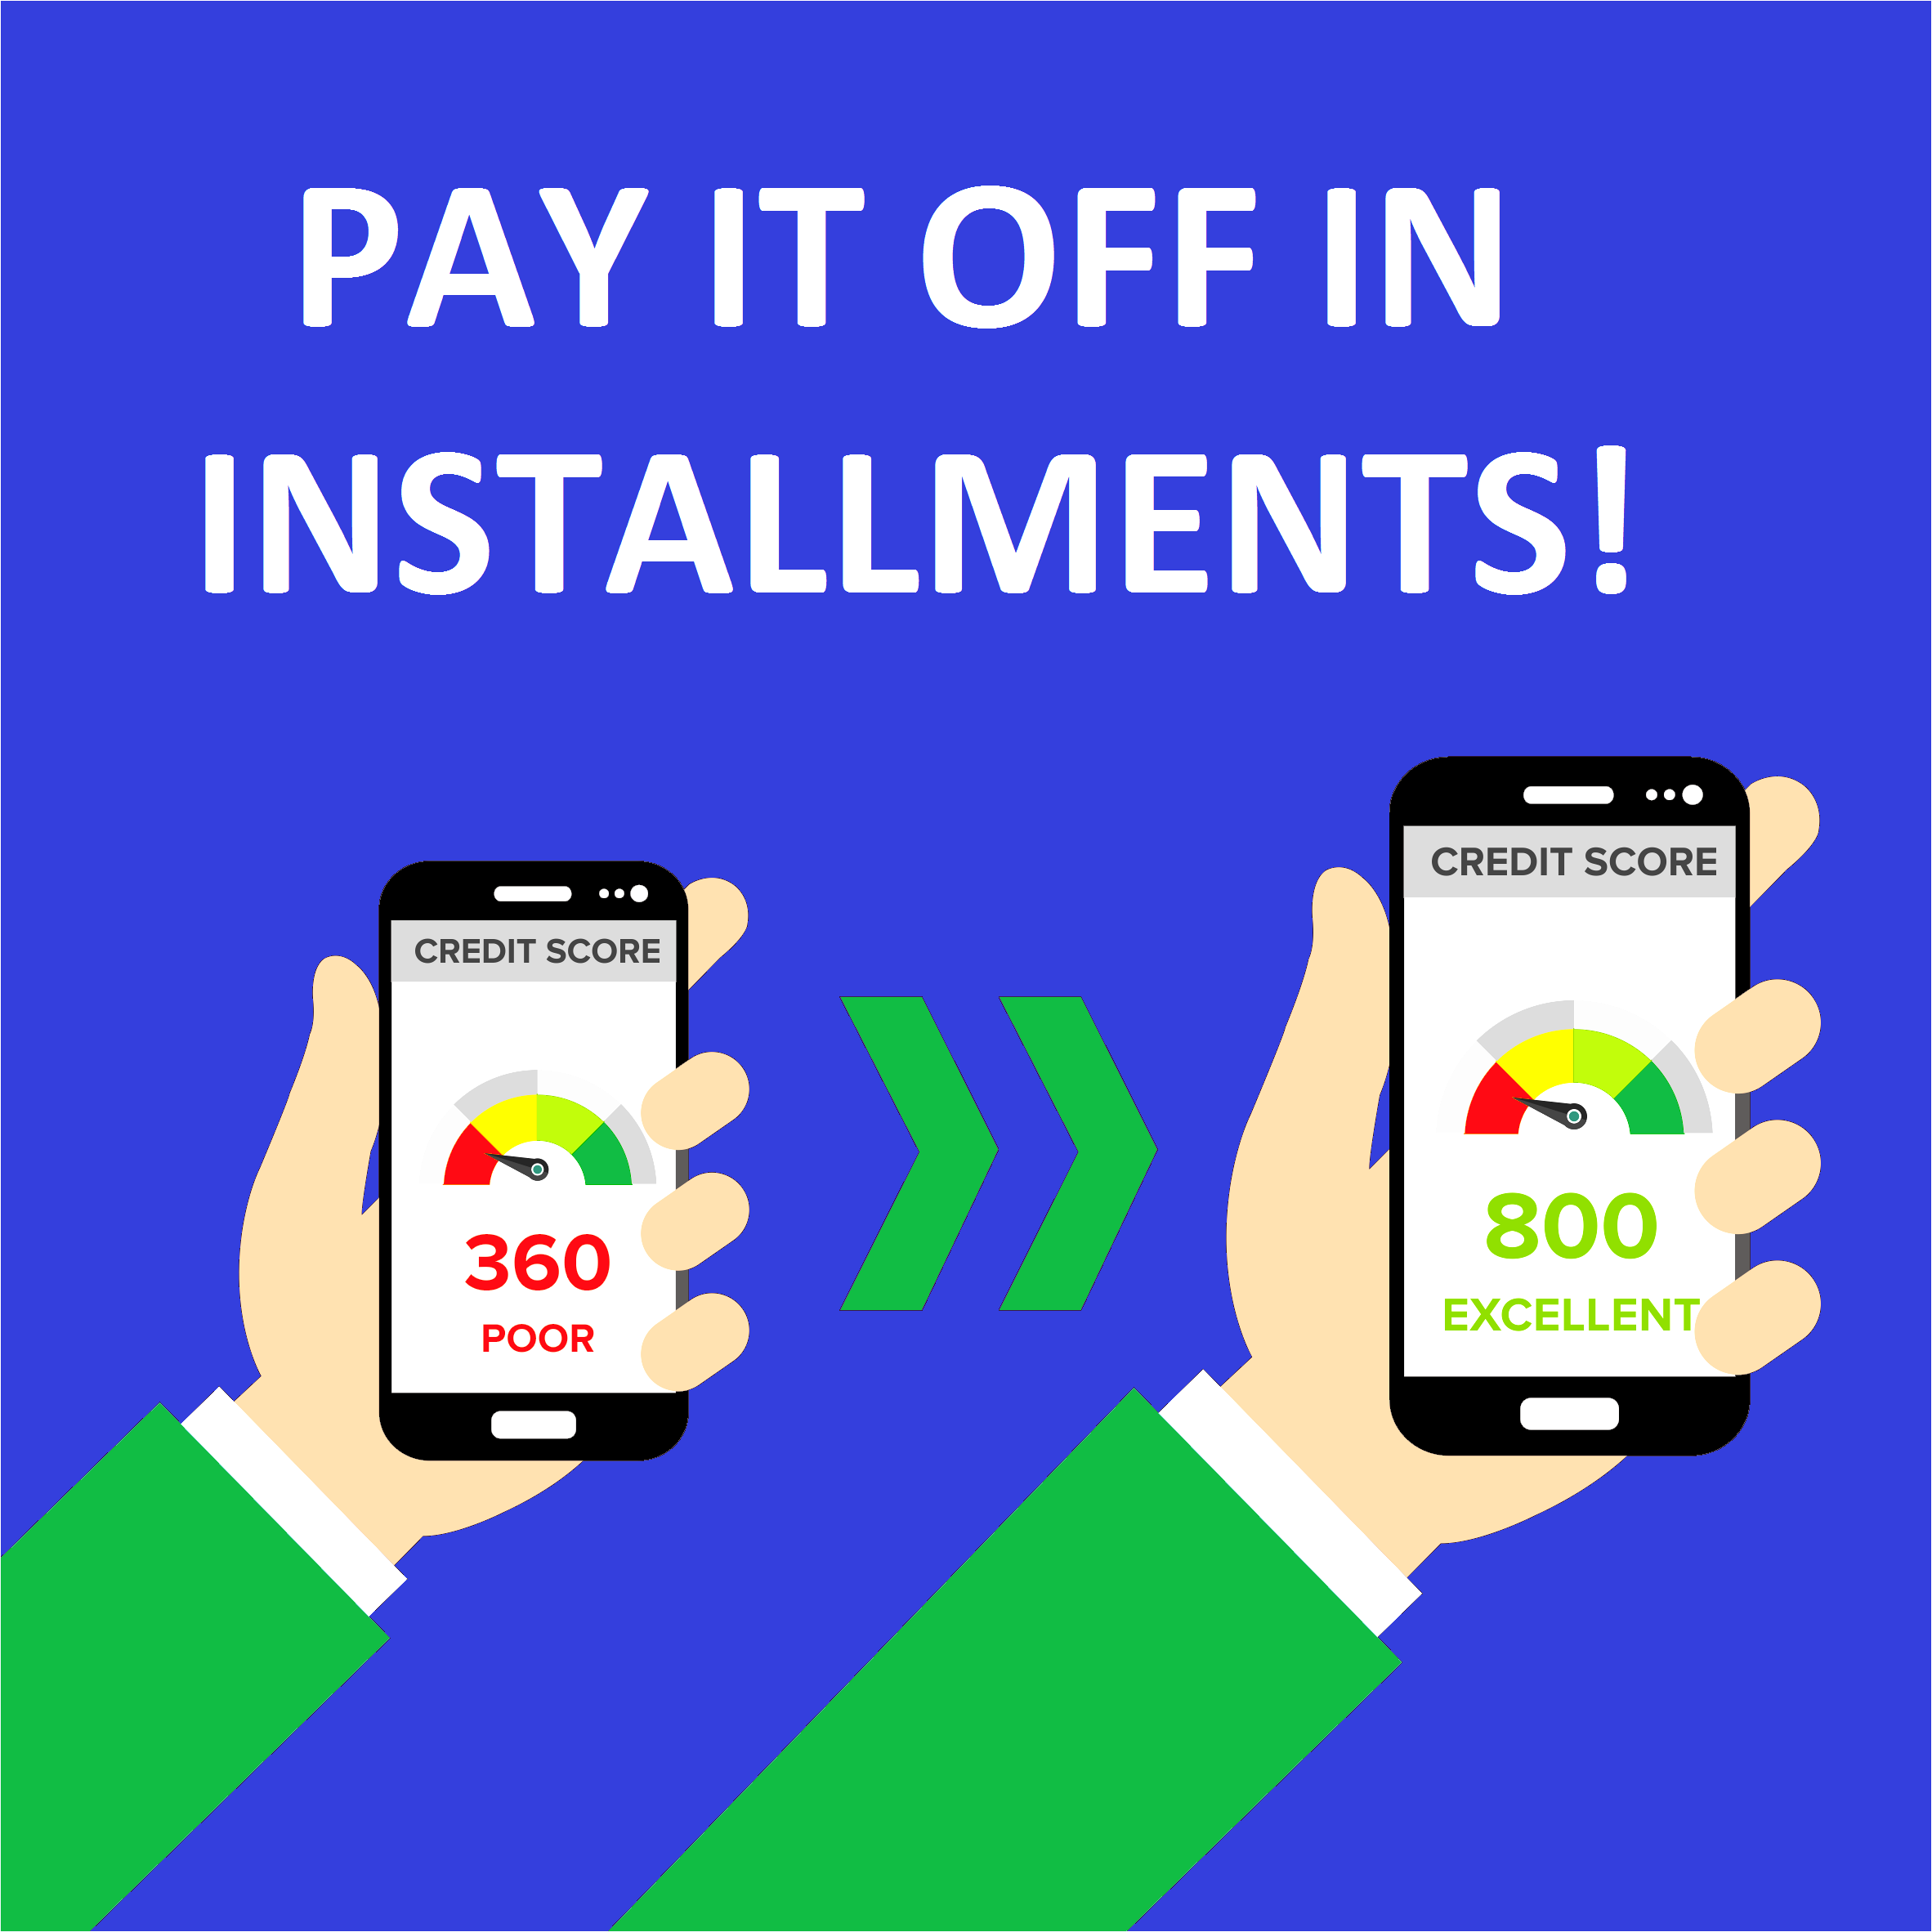 Pay It Off In Installments!